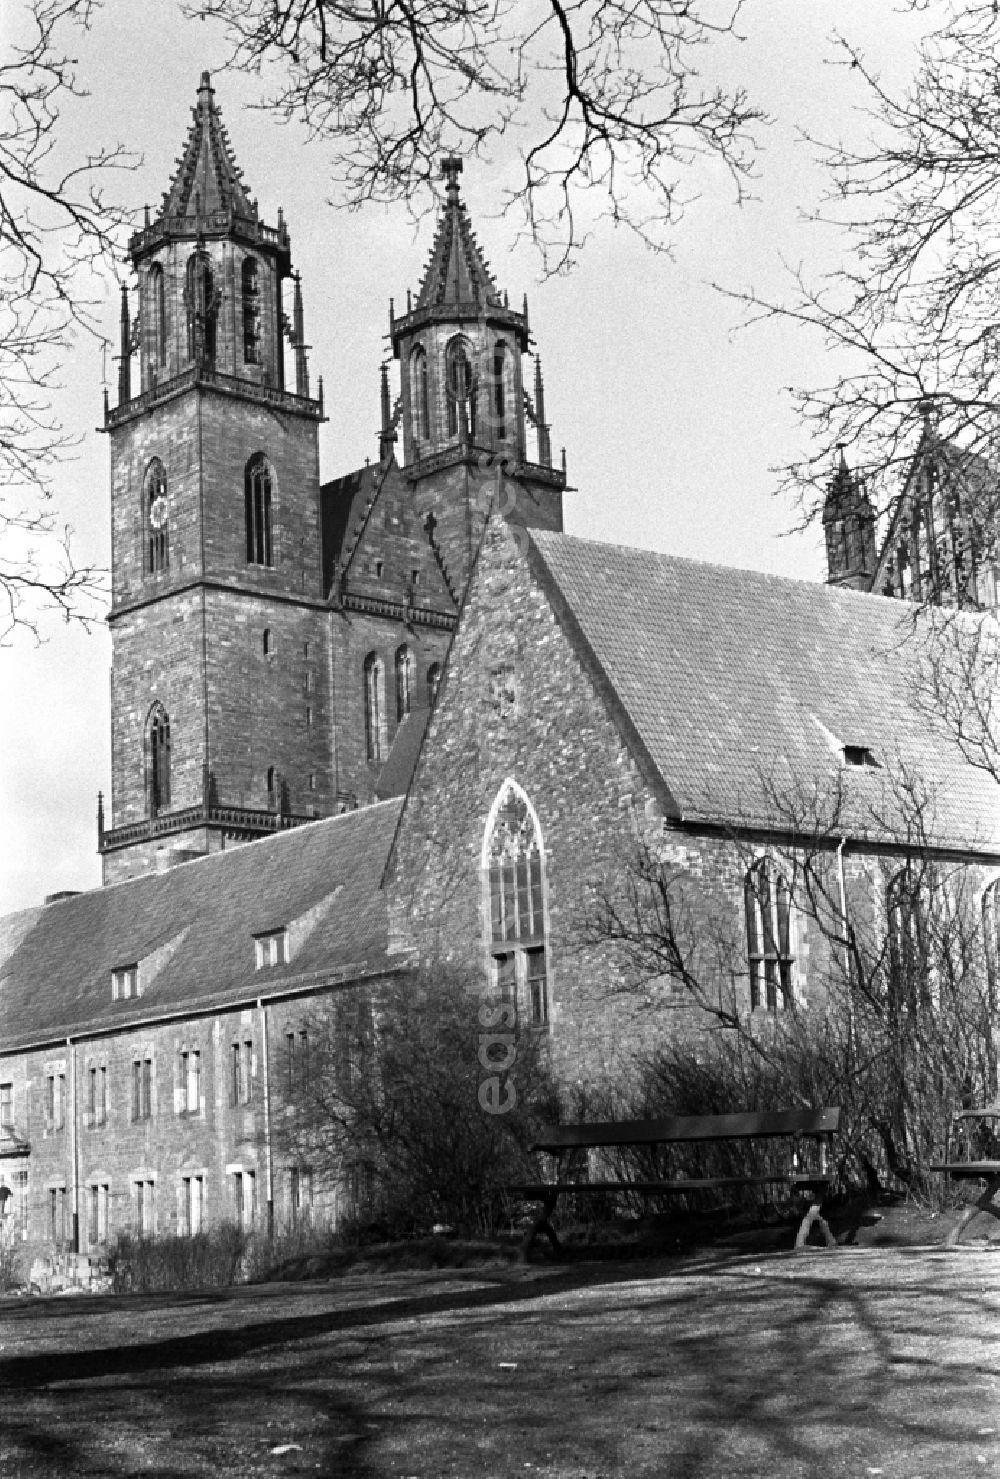 GDR picture archive: Magdeburg - The St. John's church is a church building in the Old Town district of Magdeburg. It is used as a ballroom and concert hall in the city of Magdeburg